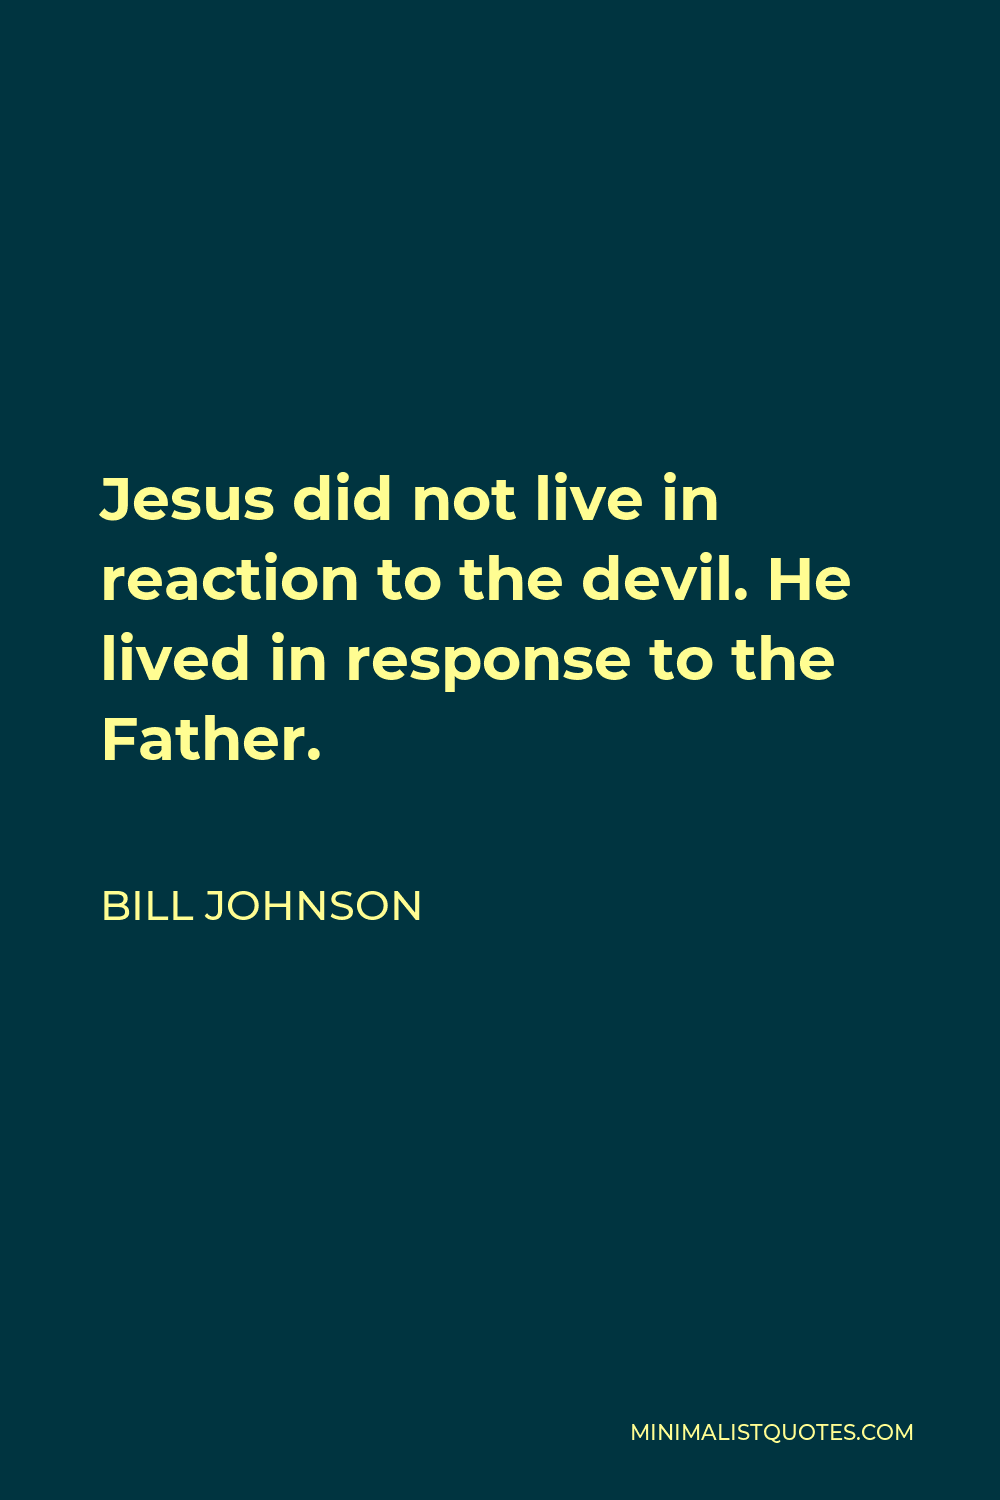 Bill Johnson Quote - Jesus did not live in reaction to the devil. He lived in response to the Father.